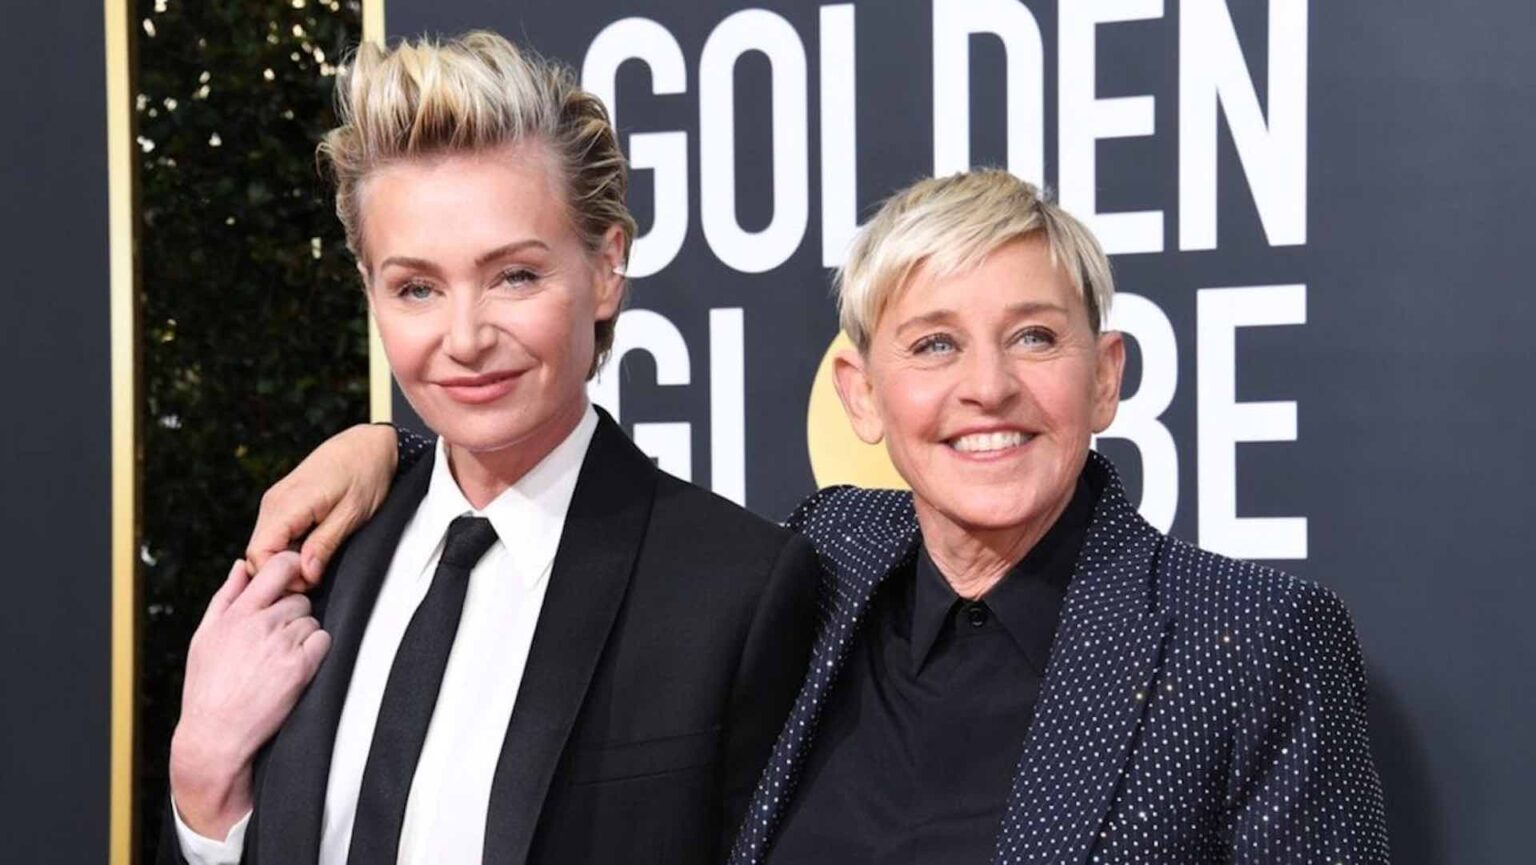 Are the rumors that Ellen DeGeneres and Portia de Rossi divorcing true? Take a closer look at the claims about their relationship.